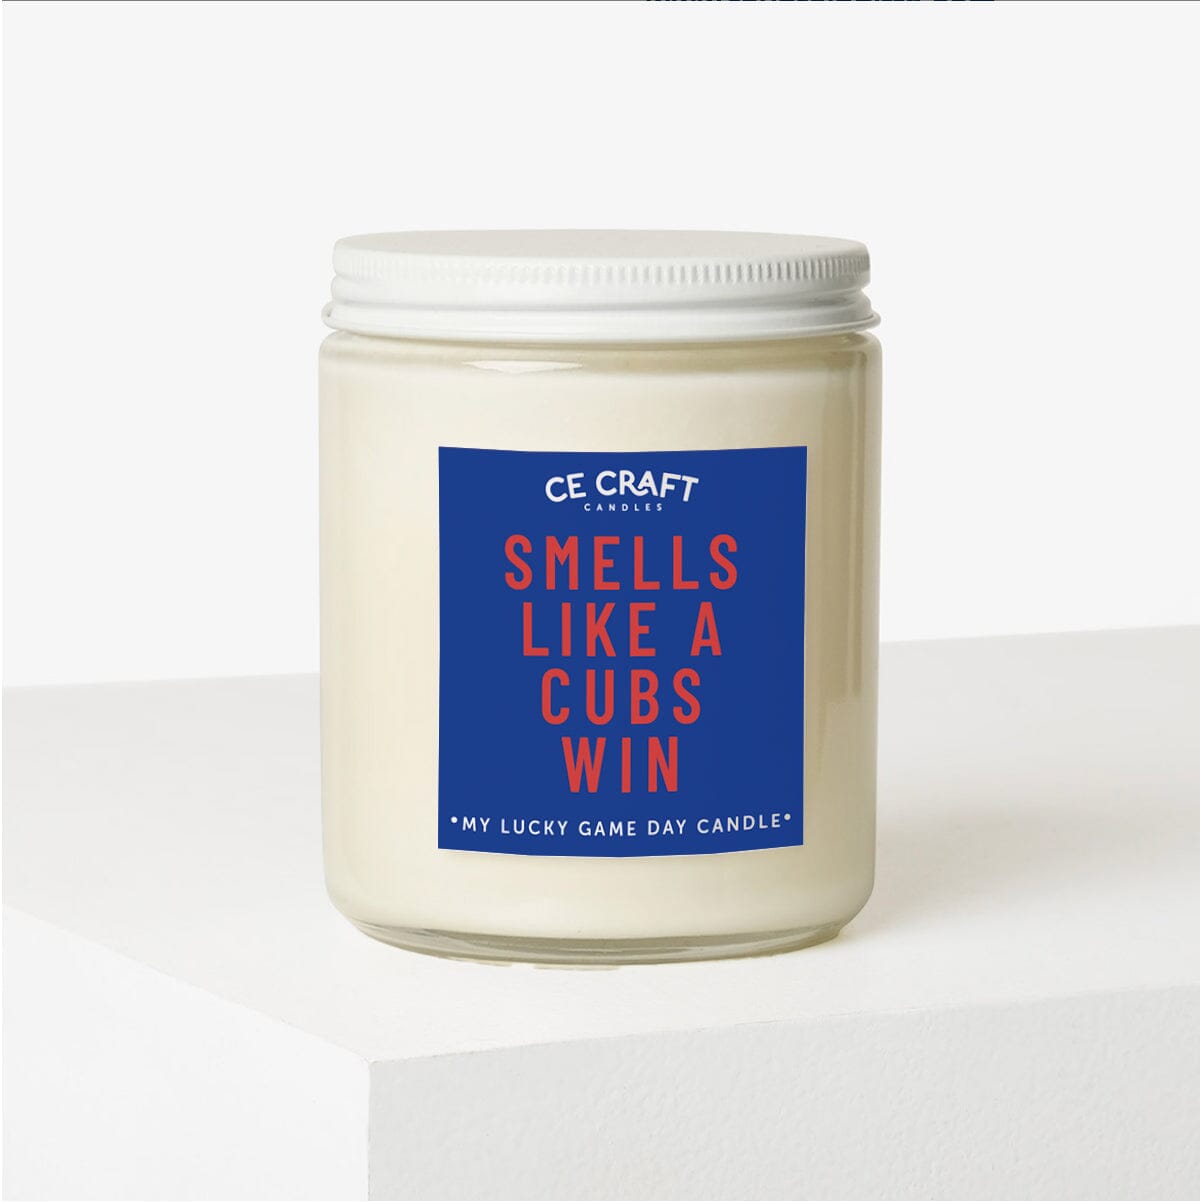 Smells Like a Cubs Win Candle Candles CE Craft 